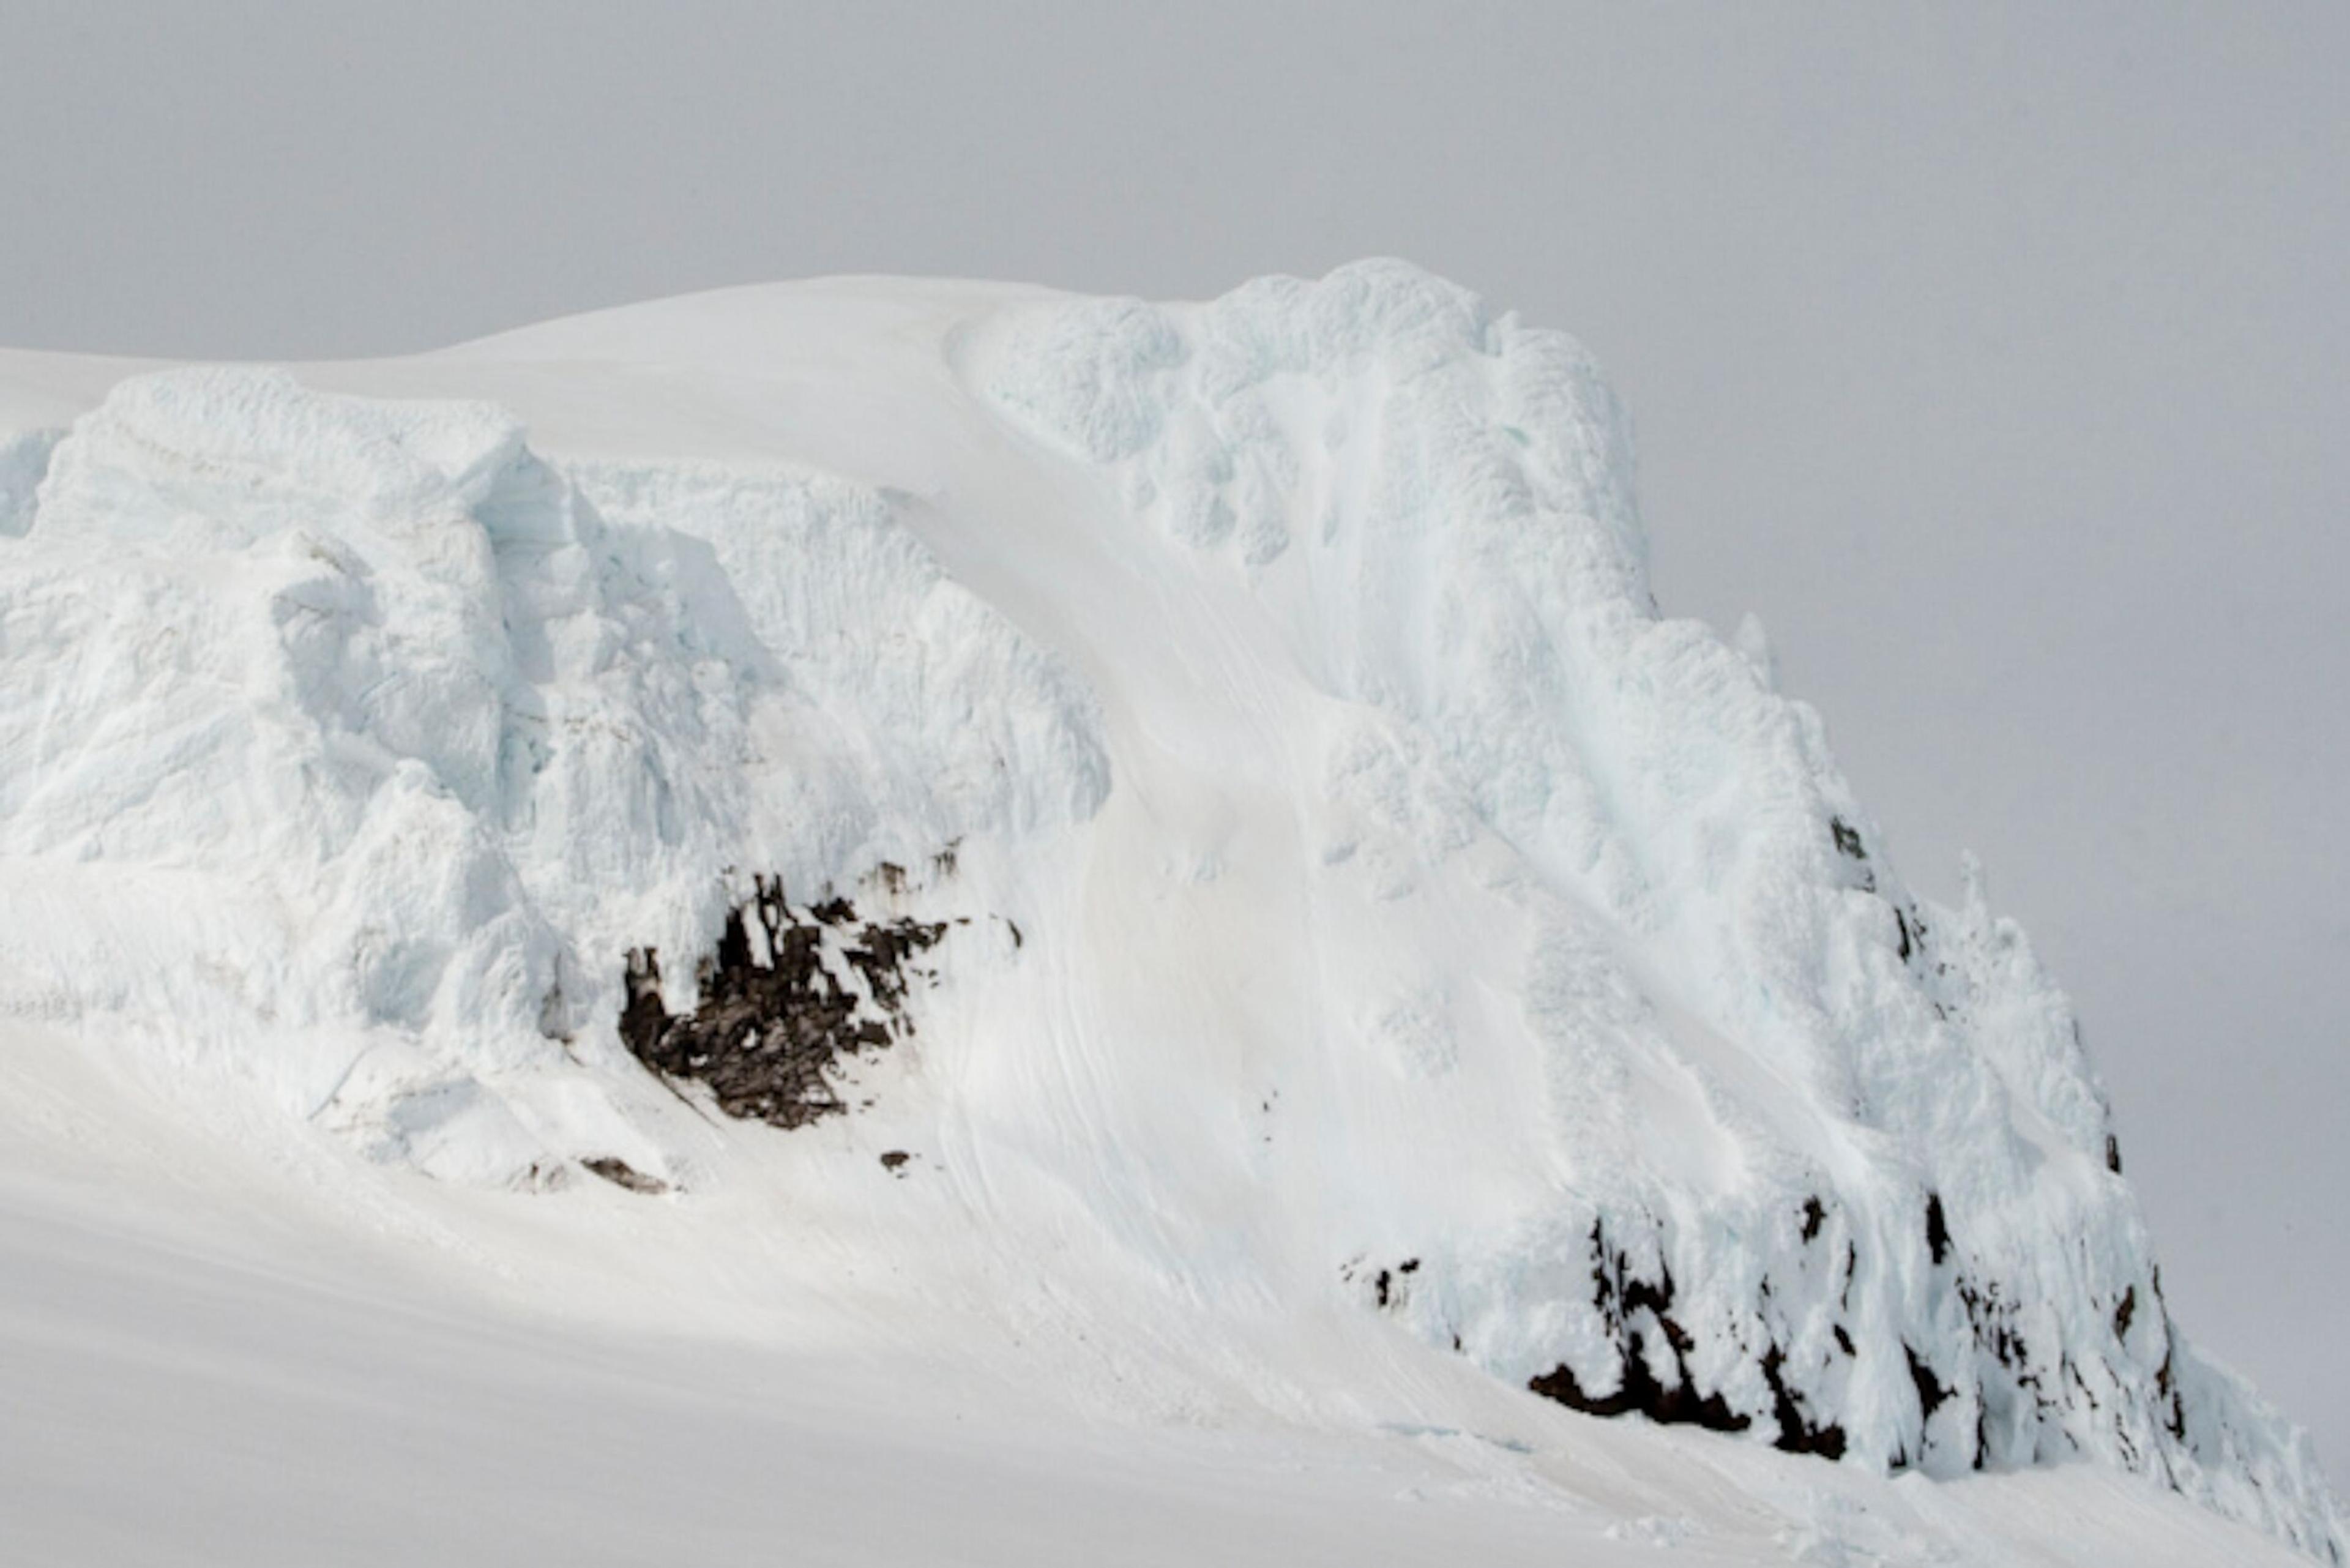 Close-up view of the rugged and snow-dusted summit of Hvannadalsnjúkur.